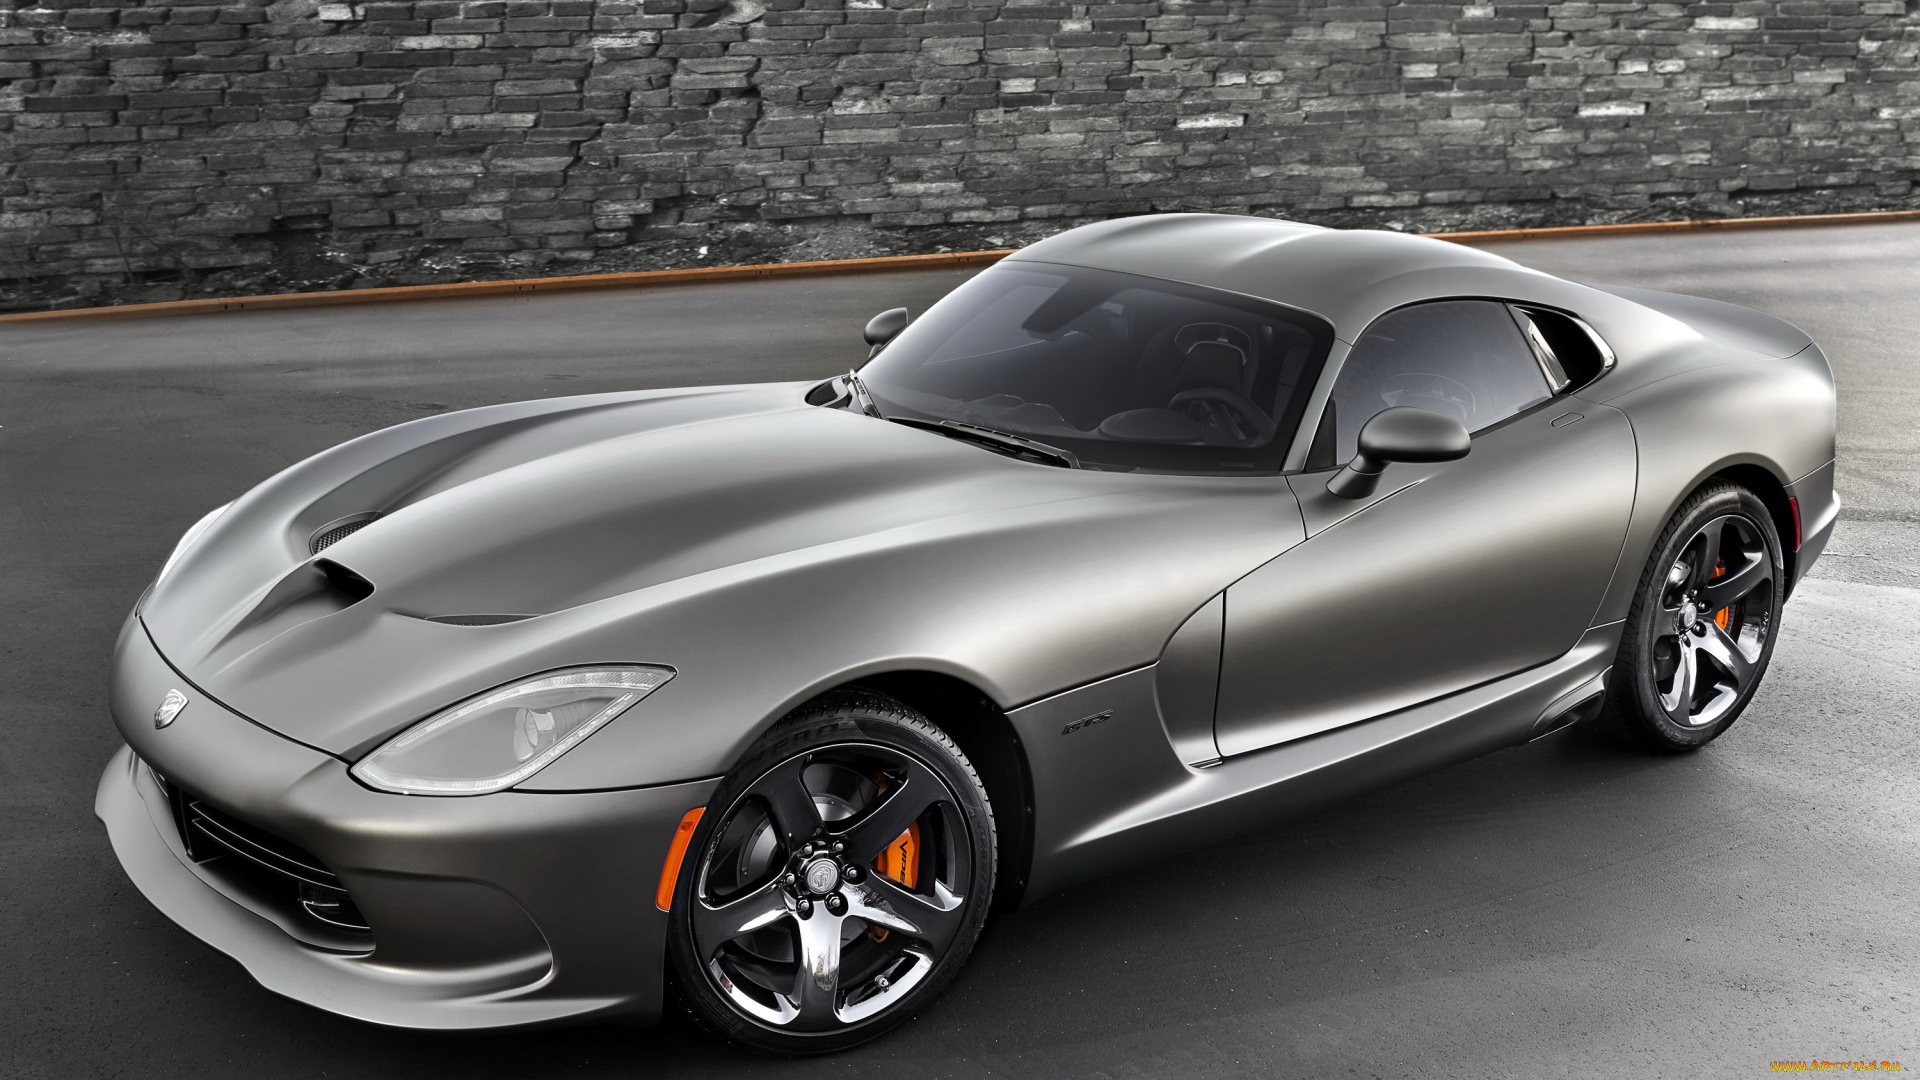 2014, srt, viper, gts, anodized, carbon, special, edition, автомобили, dodge, special, edition, anodized, carbon, srt, viper, gts